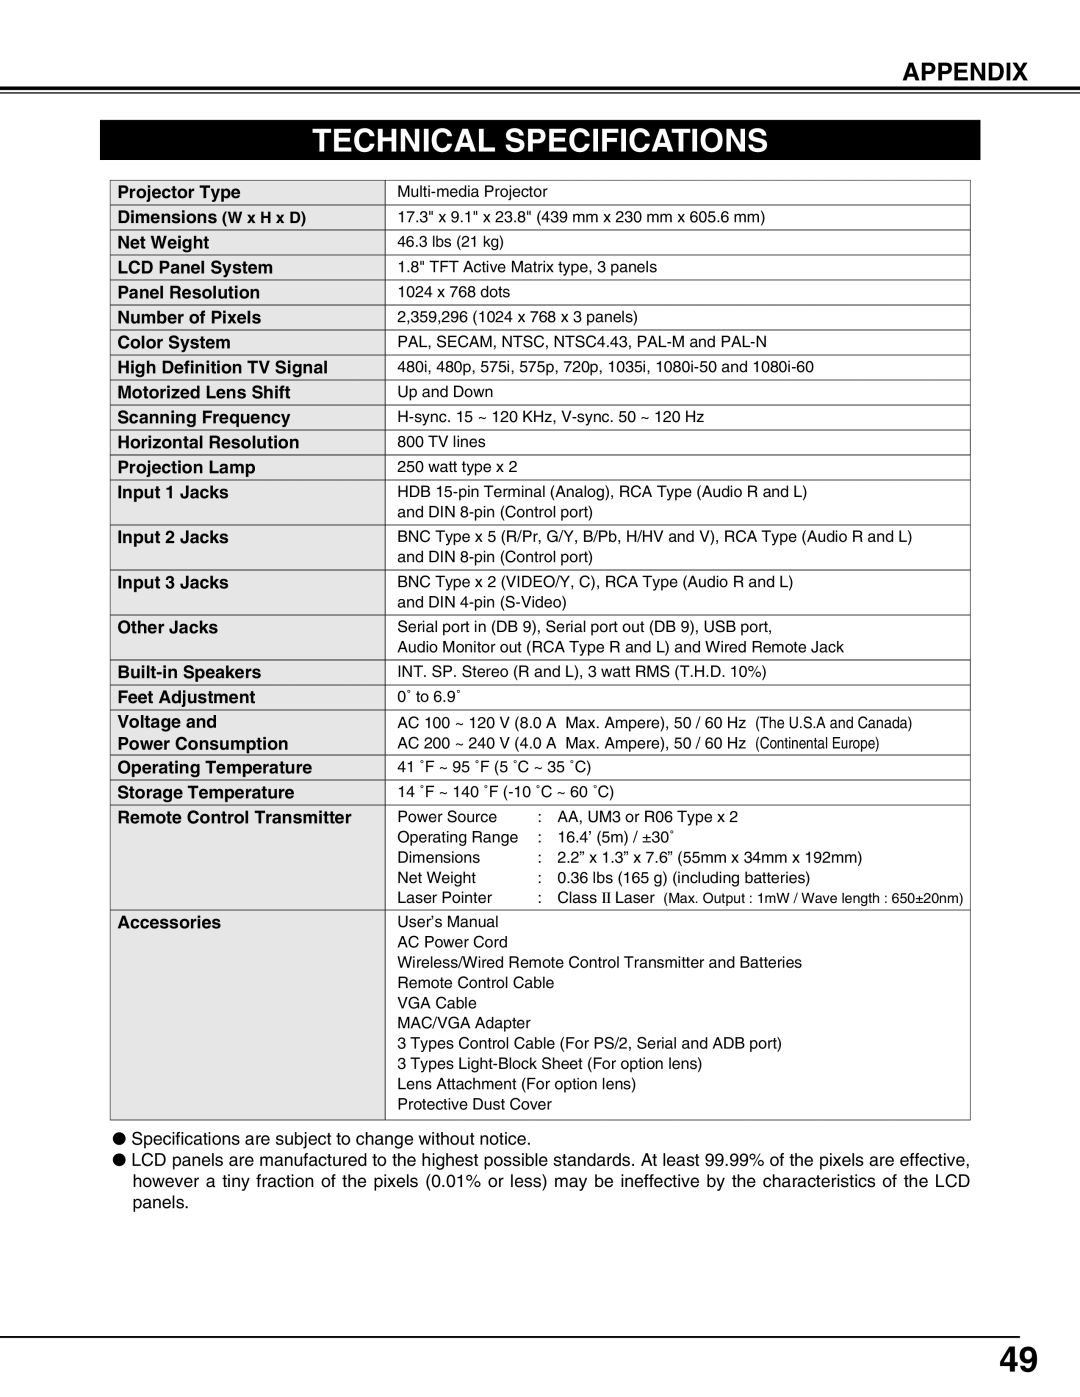 Christie Digital Systems 38-VIV302-01 user manual Technical Specifications, Appendix 